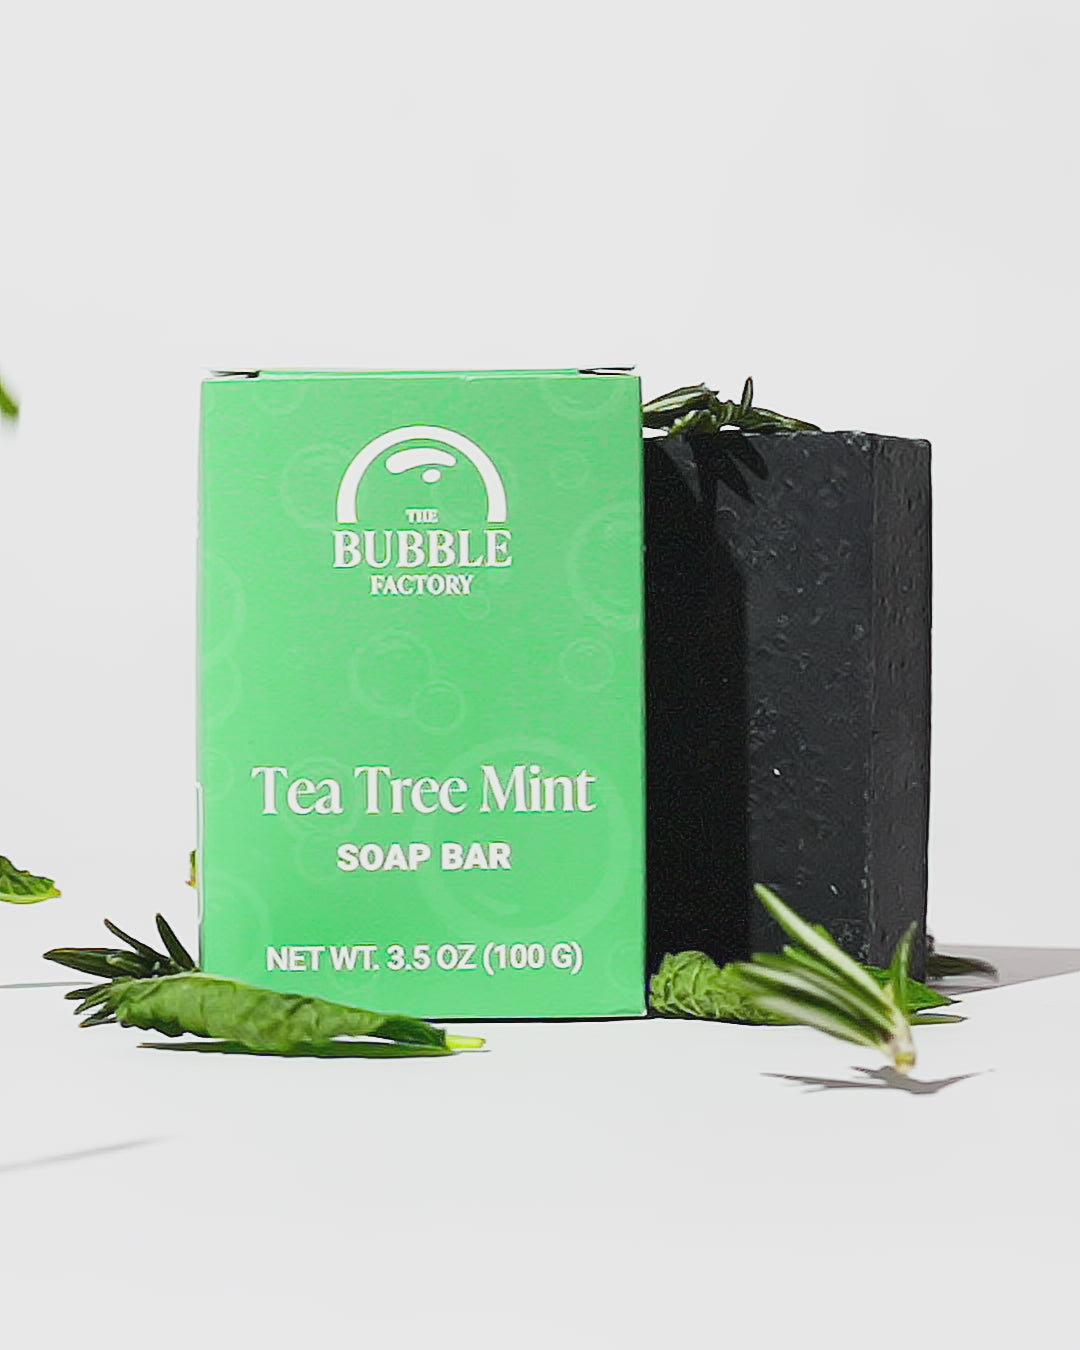 Tea Tree Mint Natural Essential Oil Soap Bar, Front view Animation with Shurb leaves and Mint leaves